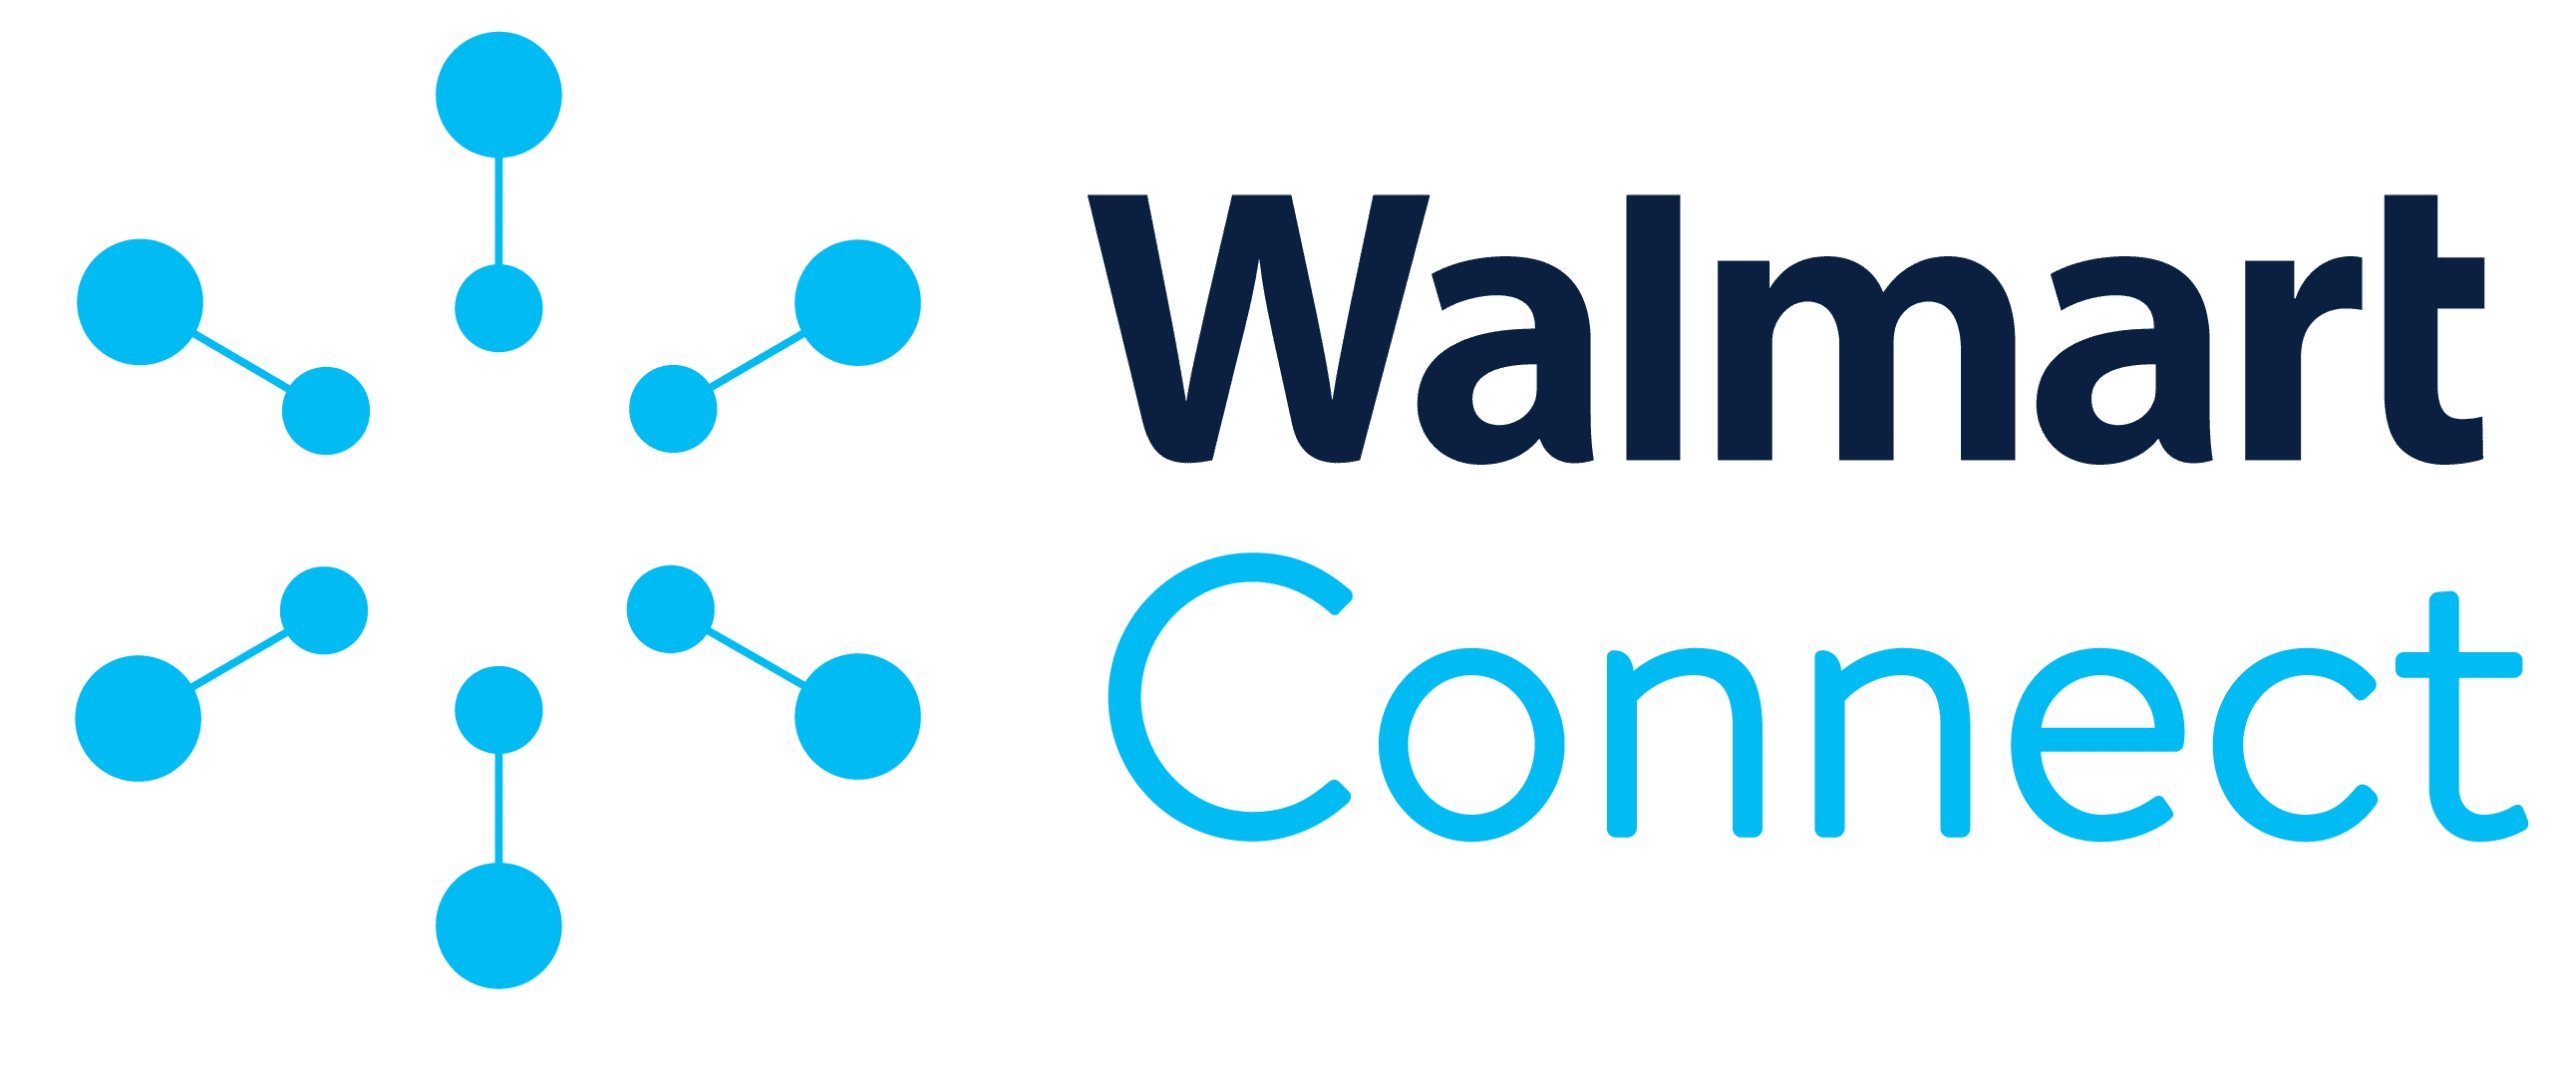 Why Walmart Connect Is Winning